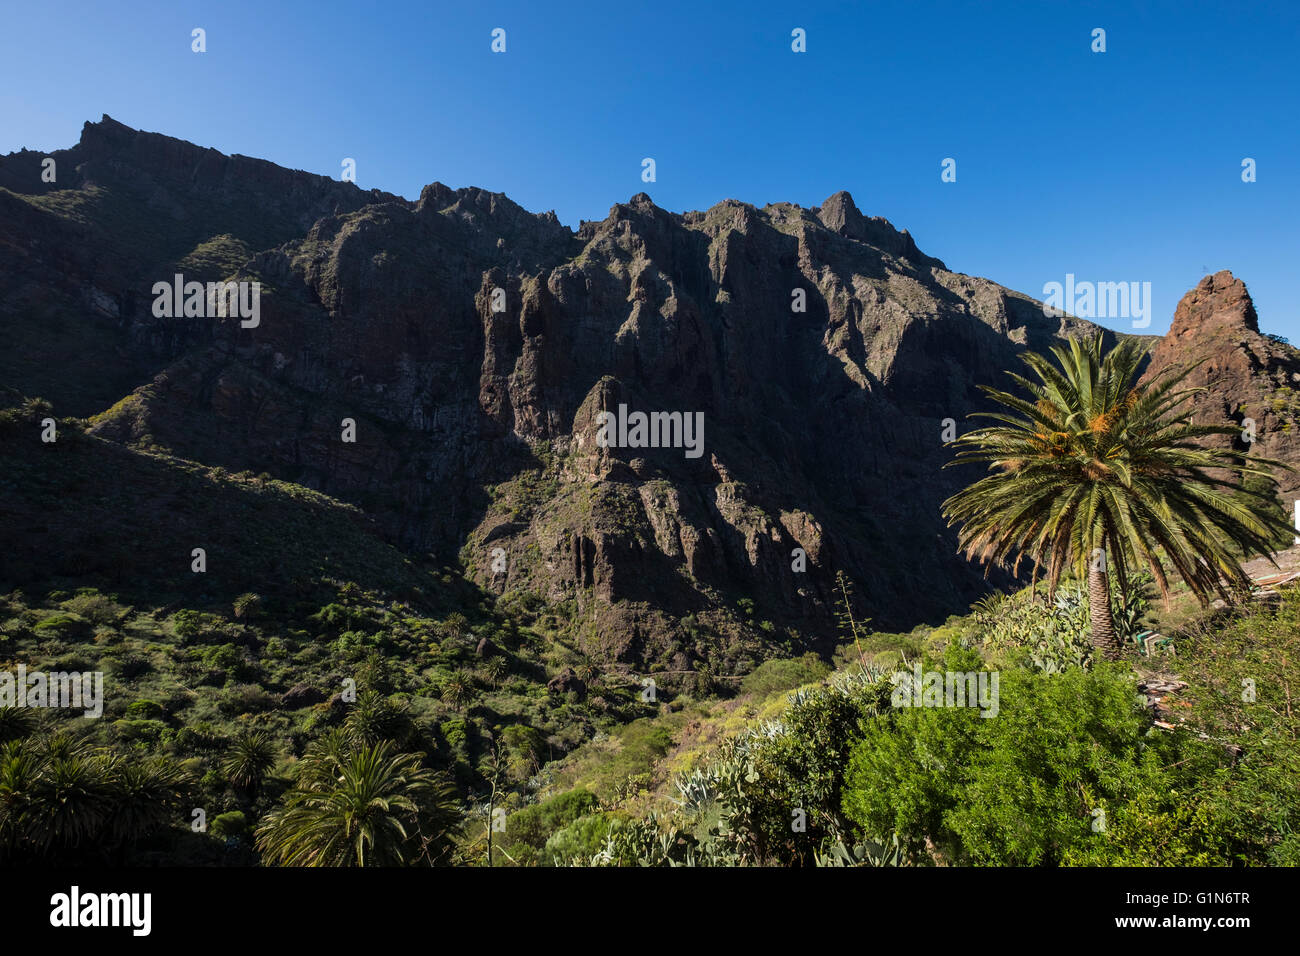 View of the southern ridge above the Masca barranco, Masca, Tenerife, Canary Islands, Spain. Stock Photo